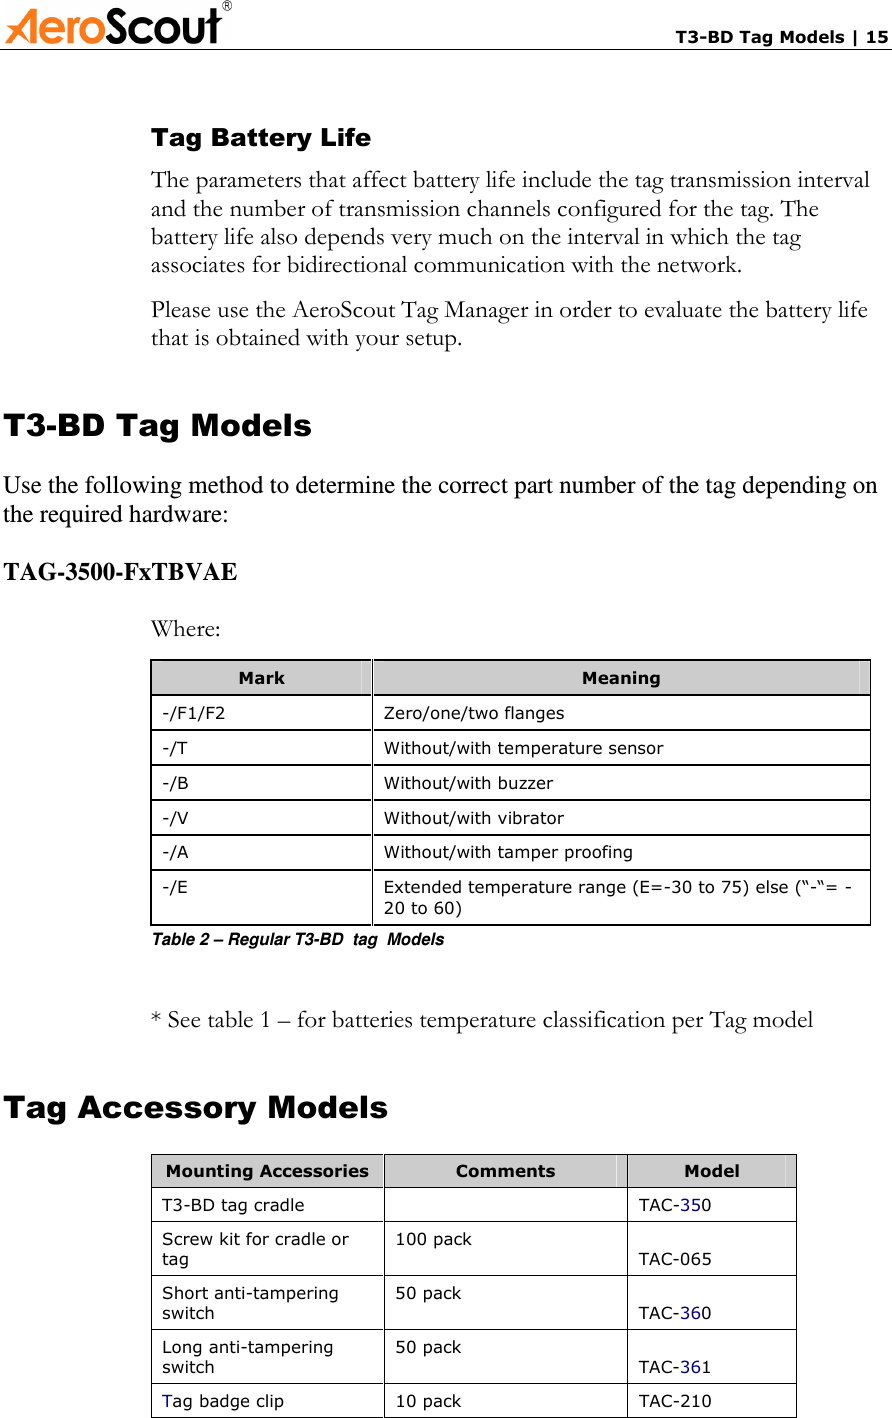       T3-BD Tag Models | 15 Tag Battery Life The parameters that affect battery life include the tag transmission interval and the number of transmission channels configured for the tag. The battery life also depends very much on the interval in which the tag associates for bidirectional communication with the network.  Please use the AeroScout Tag Manager in order to evaluate the battery life that is obtained with your setup. T3-BD Tag Models Use the following method to determine the correct part number of the tag depending on the required hardware:  TAG-3500-FxTBVAE  Where: Mark  Meaning -/F1/F2  Zero/one/two flanges -/T  Without/with temperature sensor -/B  Without/with buzzer  -/V  Without/with vibrator -/A  Without/with tamper proofing -/E  Extended temperature range (E=-30 to 75) else (“-“= -20 to 60) Table 2 – Regular T3-BD  tag  Models  * See table 1 – for batteries temperature classification per Tag model Tag Accessory Models Mounting Accessories  Comments  Model T3-BD tag cradle    TAC-350 Screw kit for cradle or tag 100 pack TAC-065 Short anti-tampering switch  50 pack TAC-360 Long anti-tampering switch  50 pack TAC-361 Tag badge clip   10 pack  TAC-210 